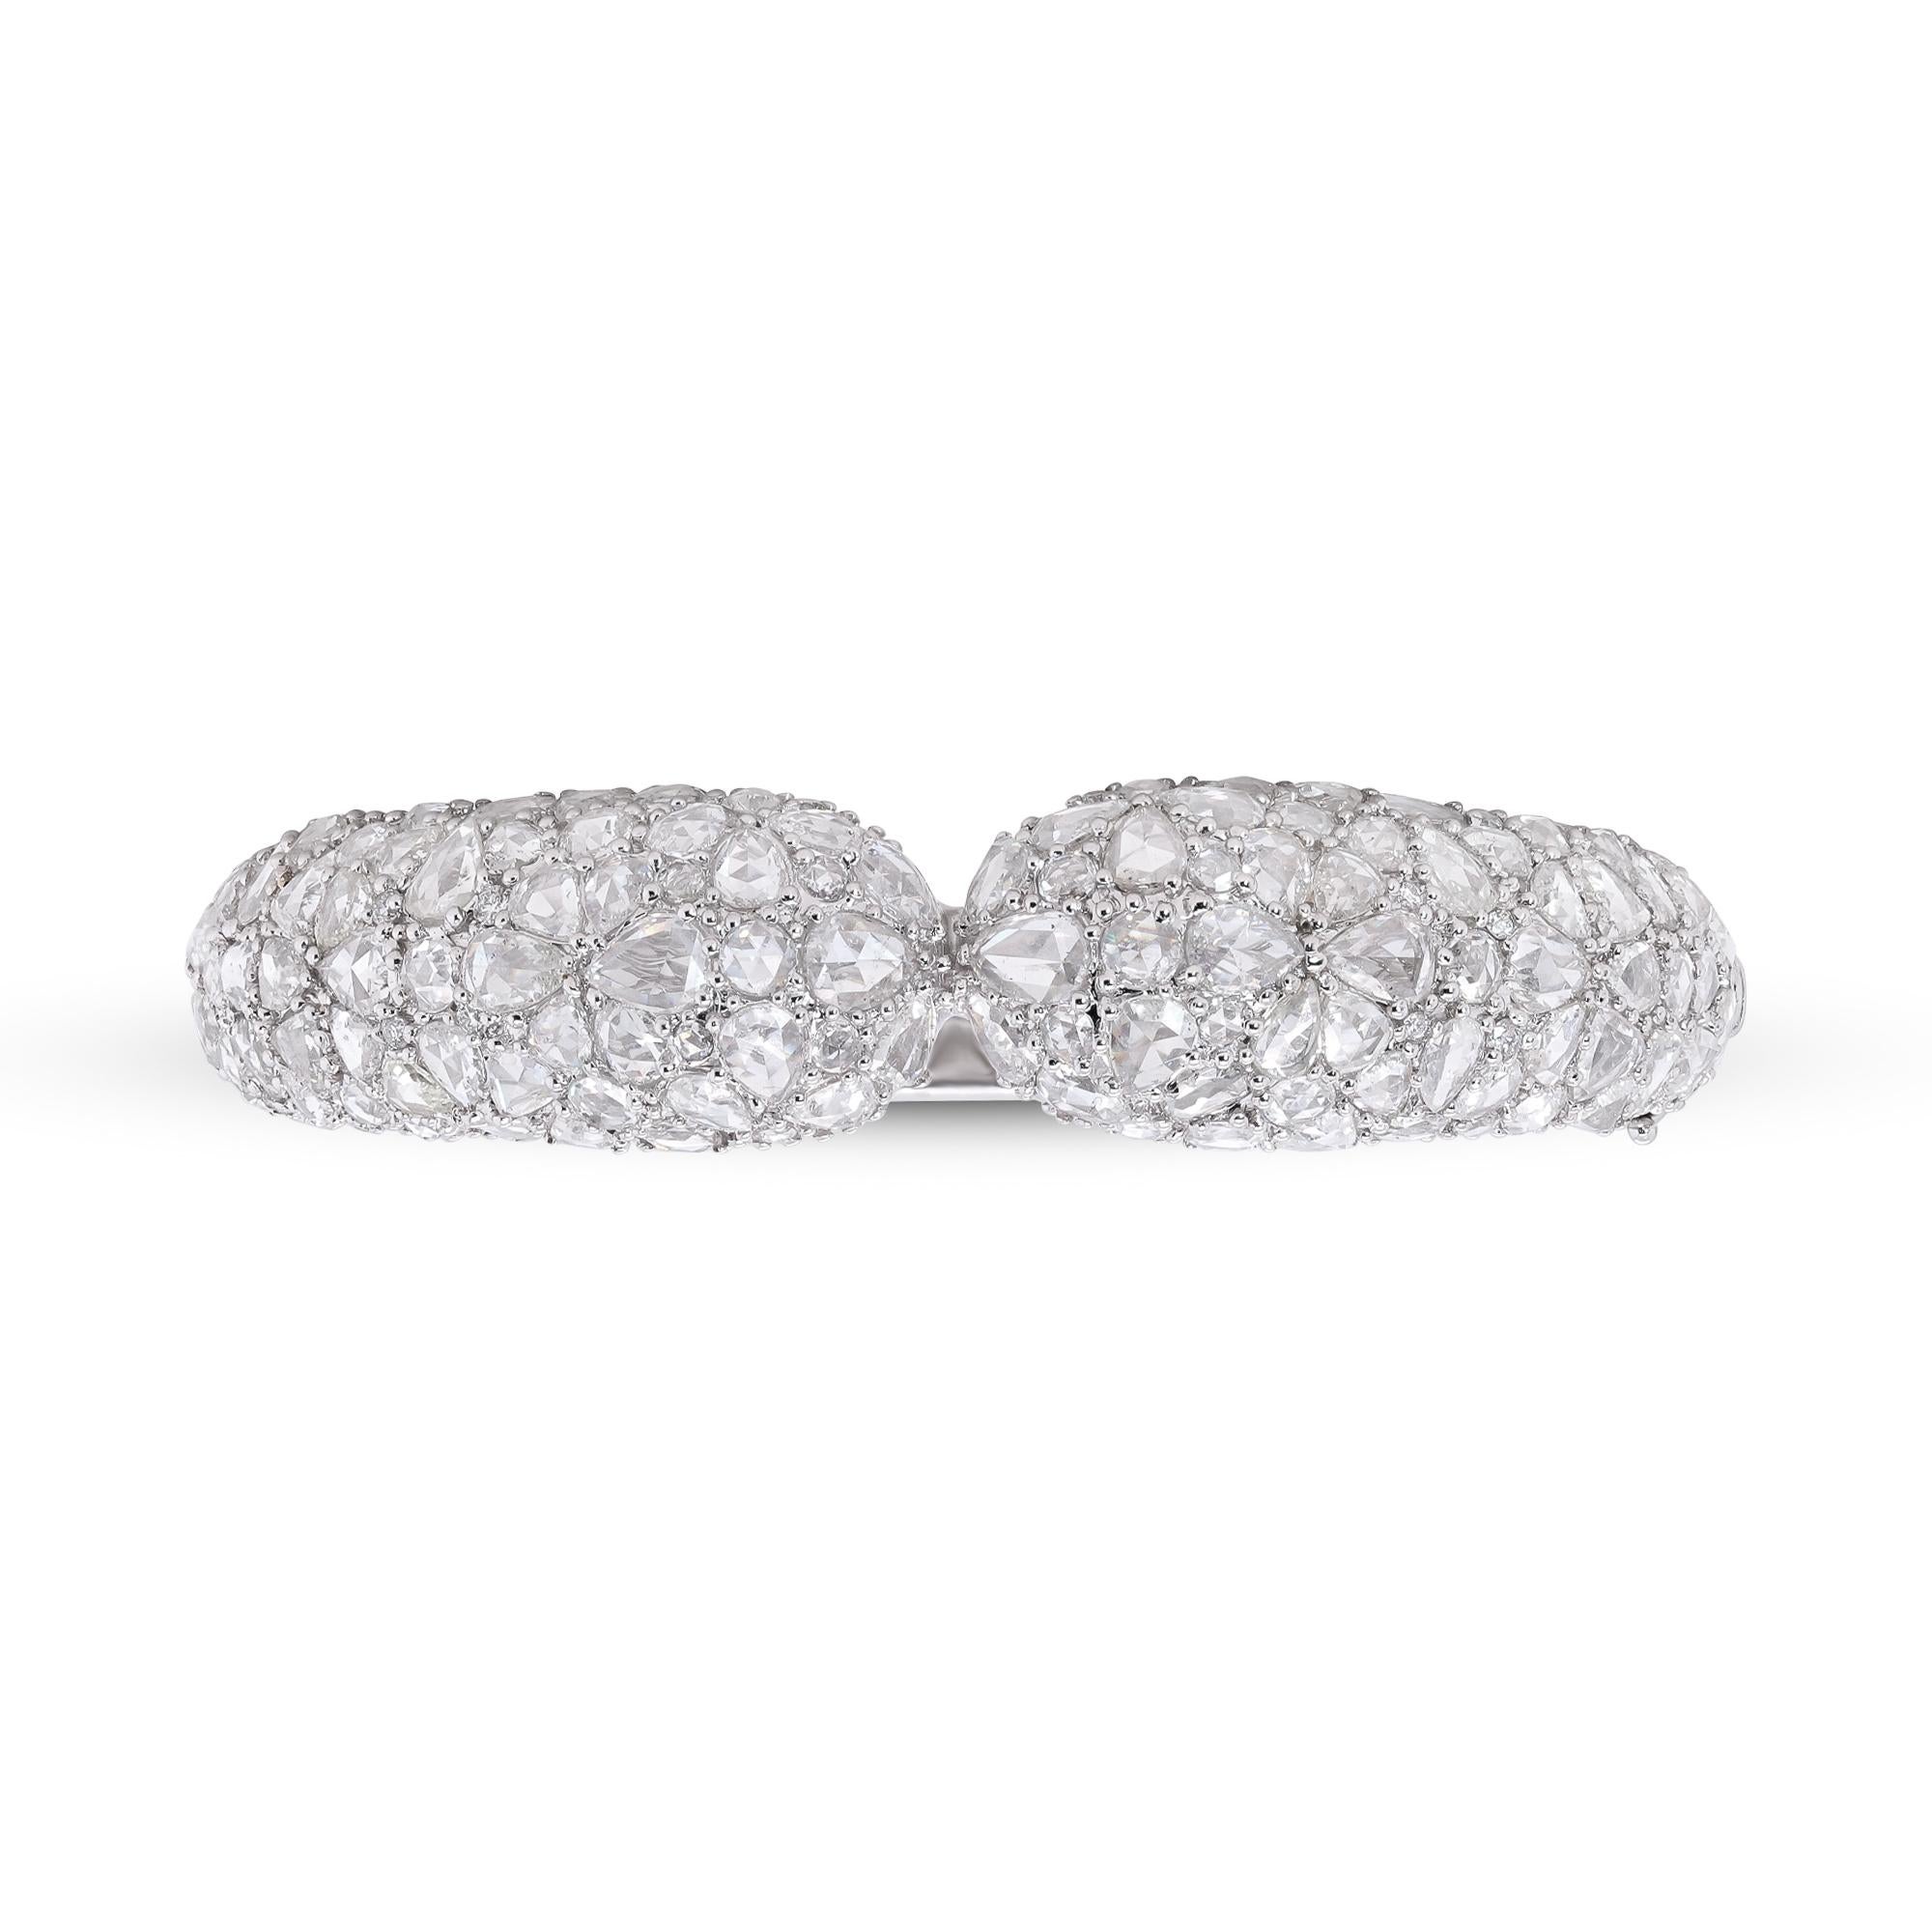 Stunning, timeless and classy eternity Unique Bangle. Decorate yourself in luxury with this Gin & Grace Bangle. The 18K White Gold jewelry boasts with Pear-cut (18 pcs) 2.16 carat , Rose-cut (43 Pcs) 2.52 Carat, WD (57 Pcs) 6.76 carat, Round-Cut (22